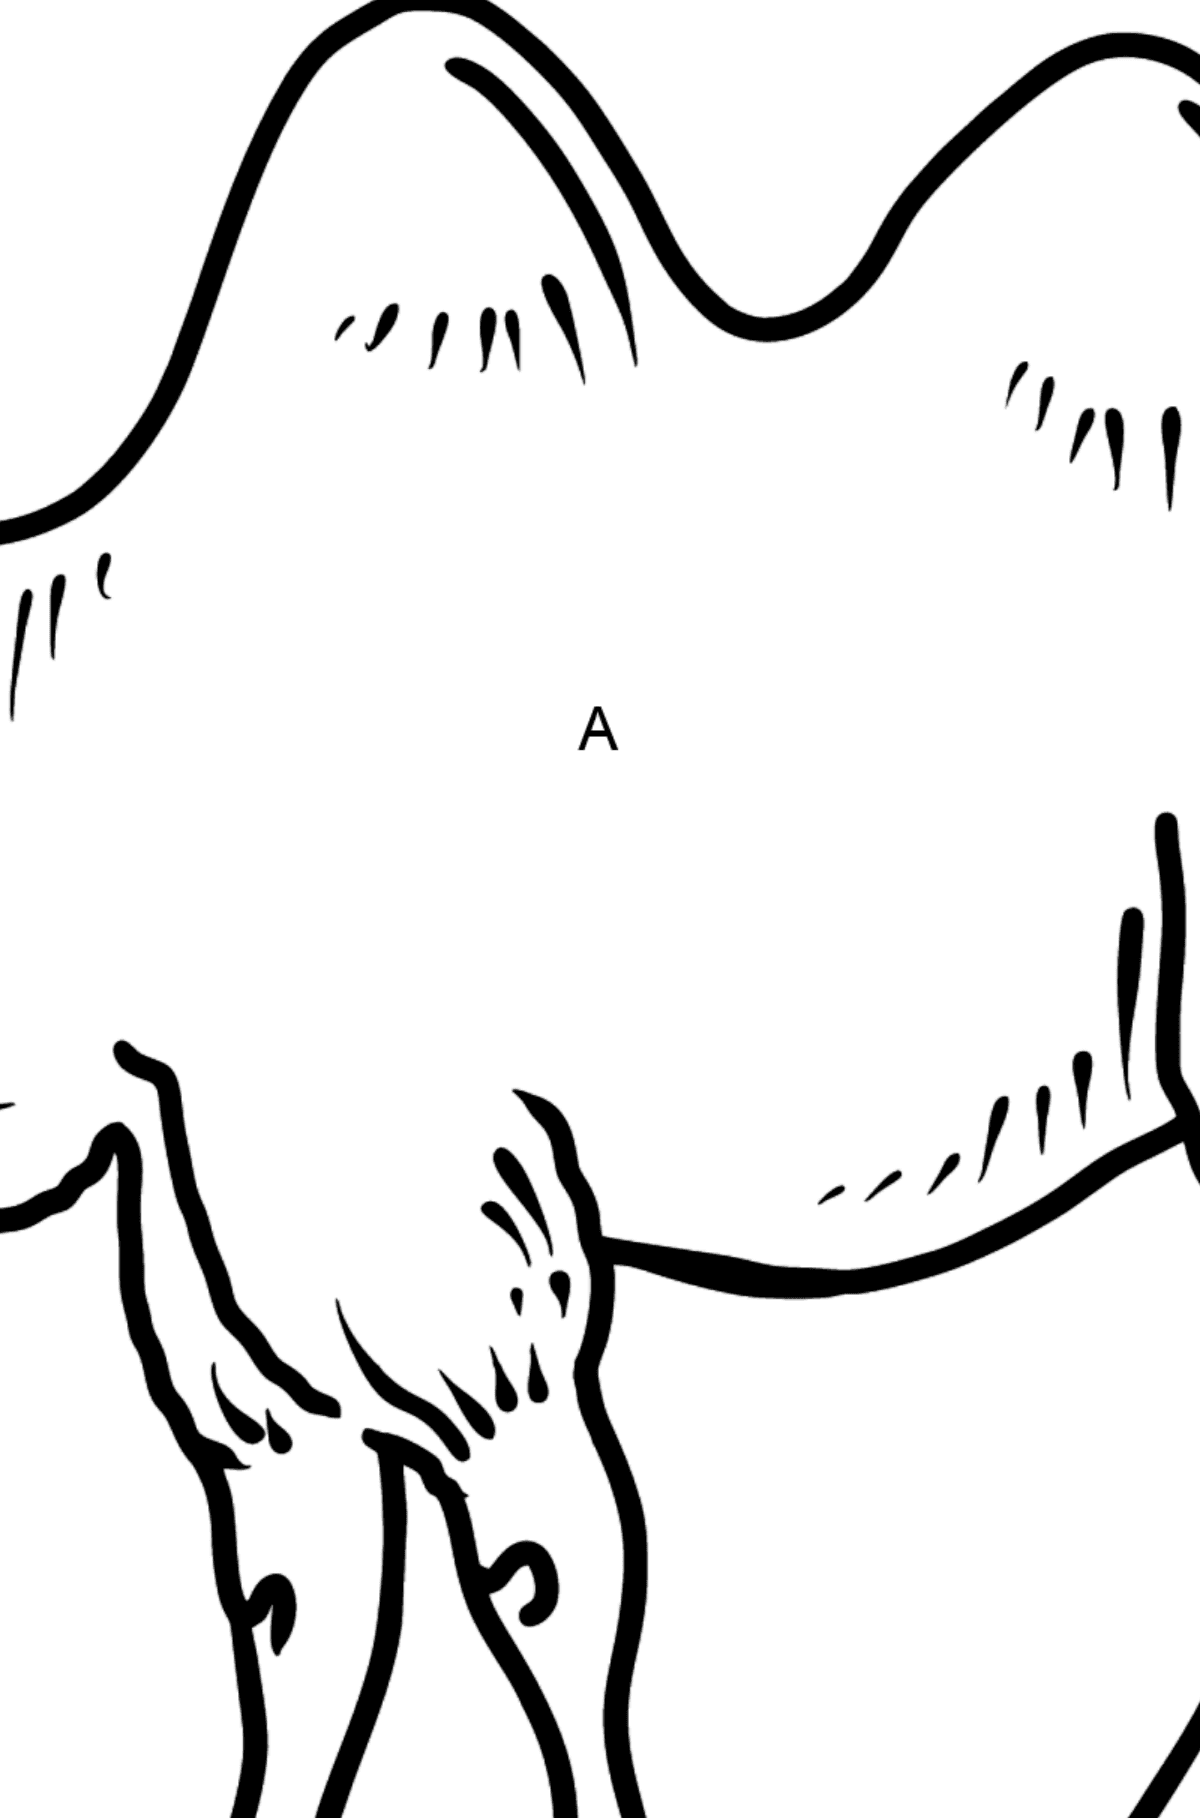 Camel coloring page - Coloring by Letters for Kids